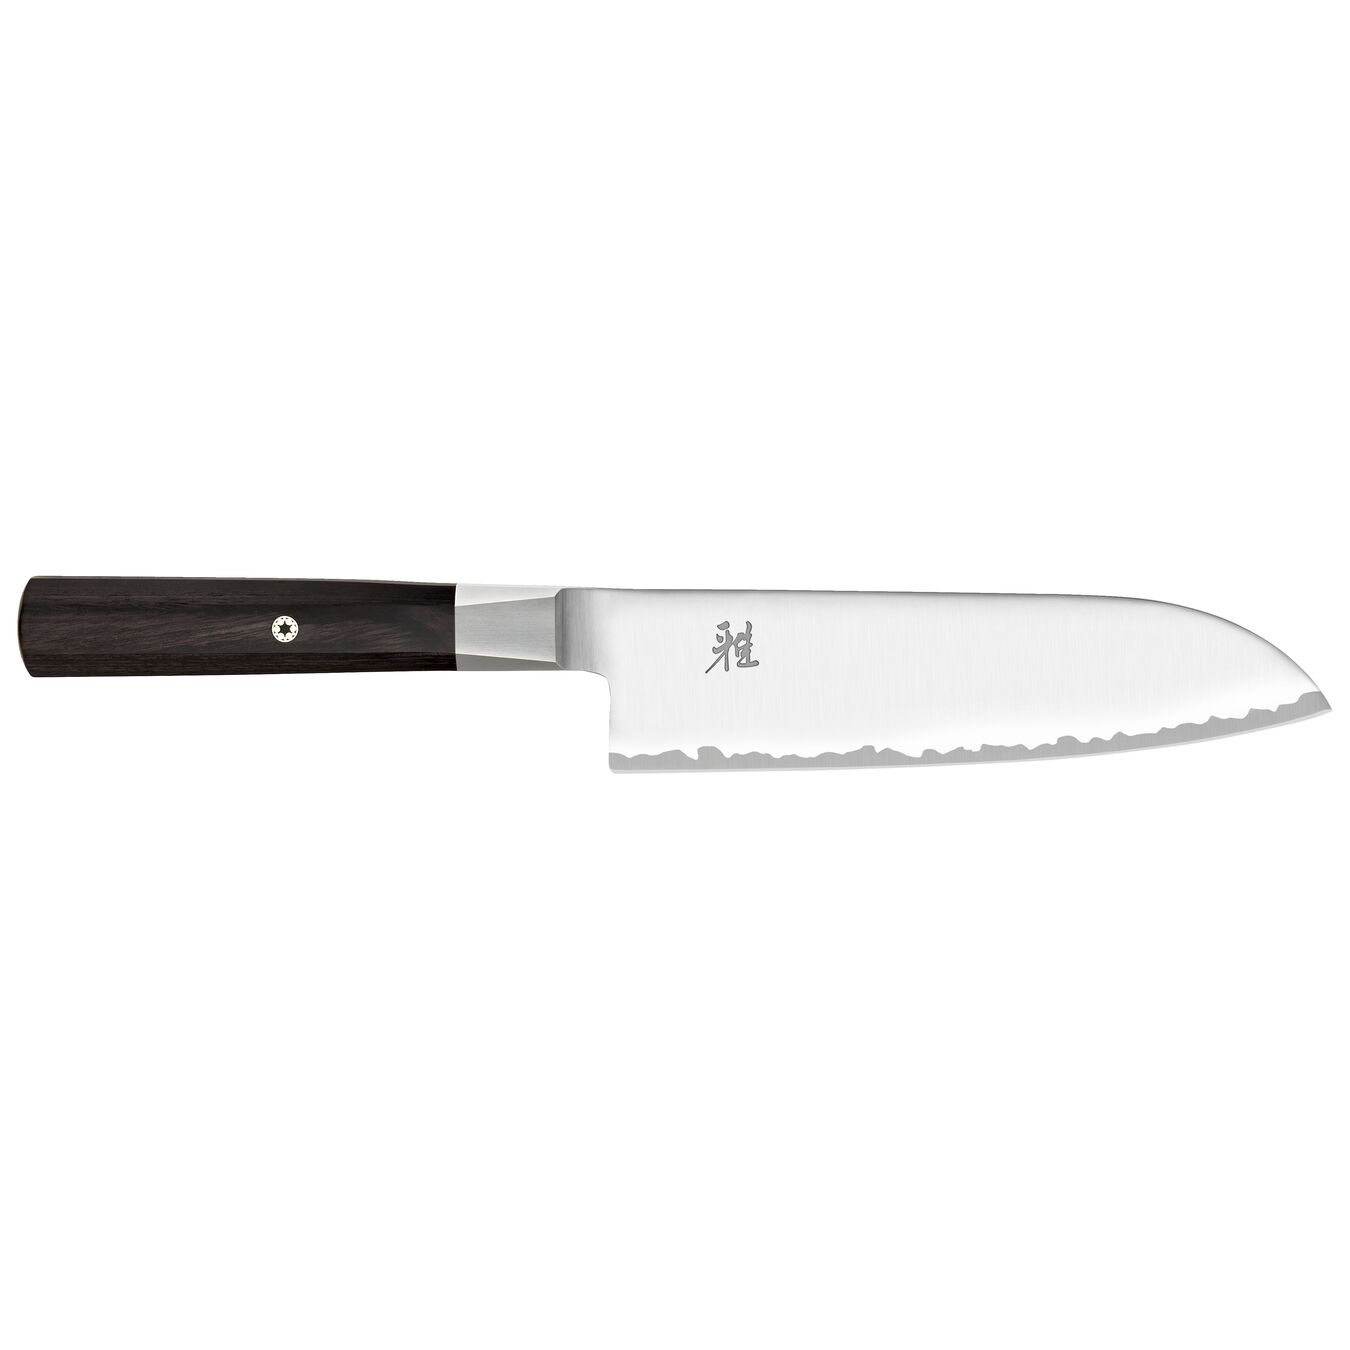 7 inch Santoku - Visual Imperfections,,large 5